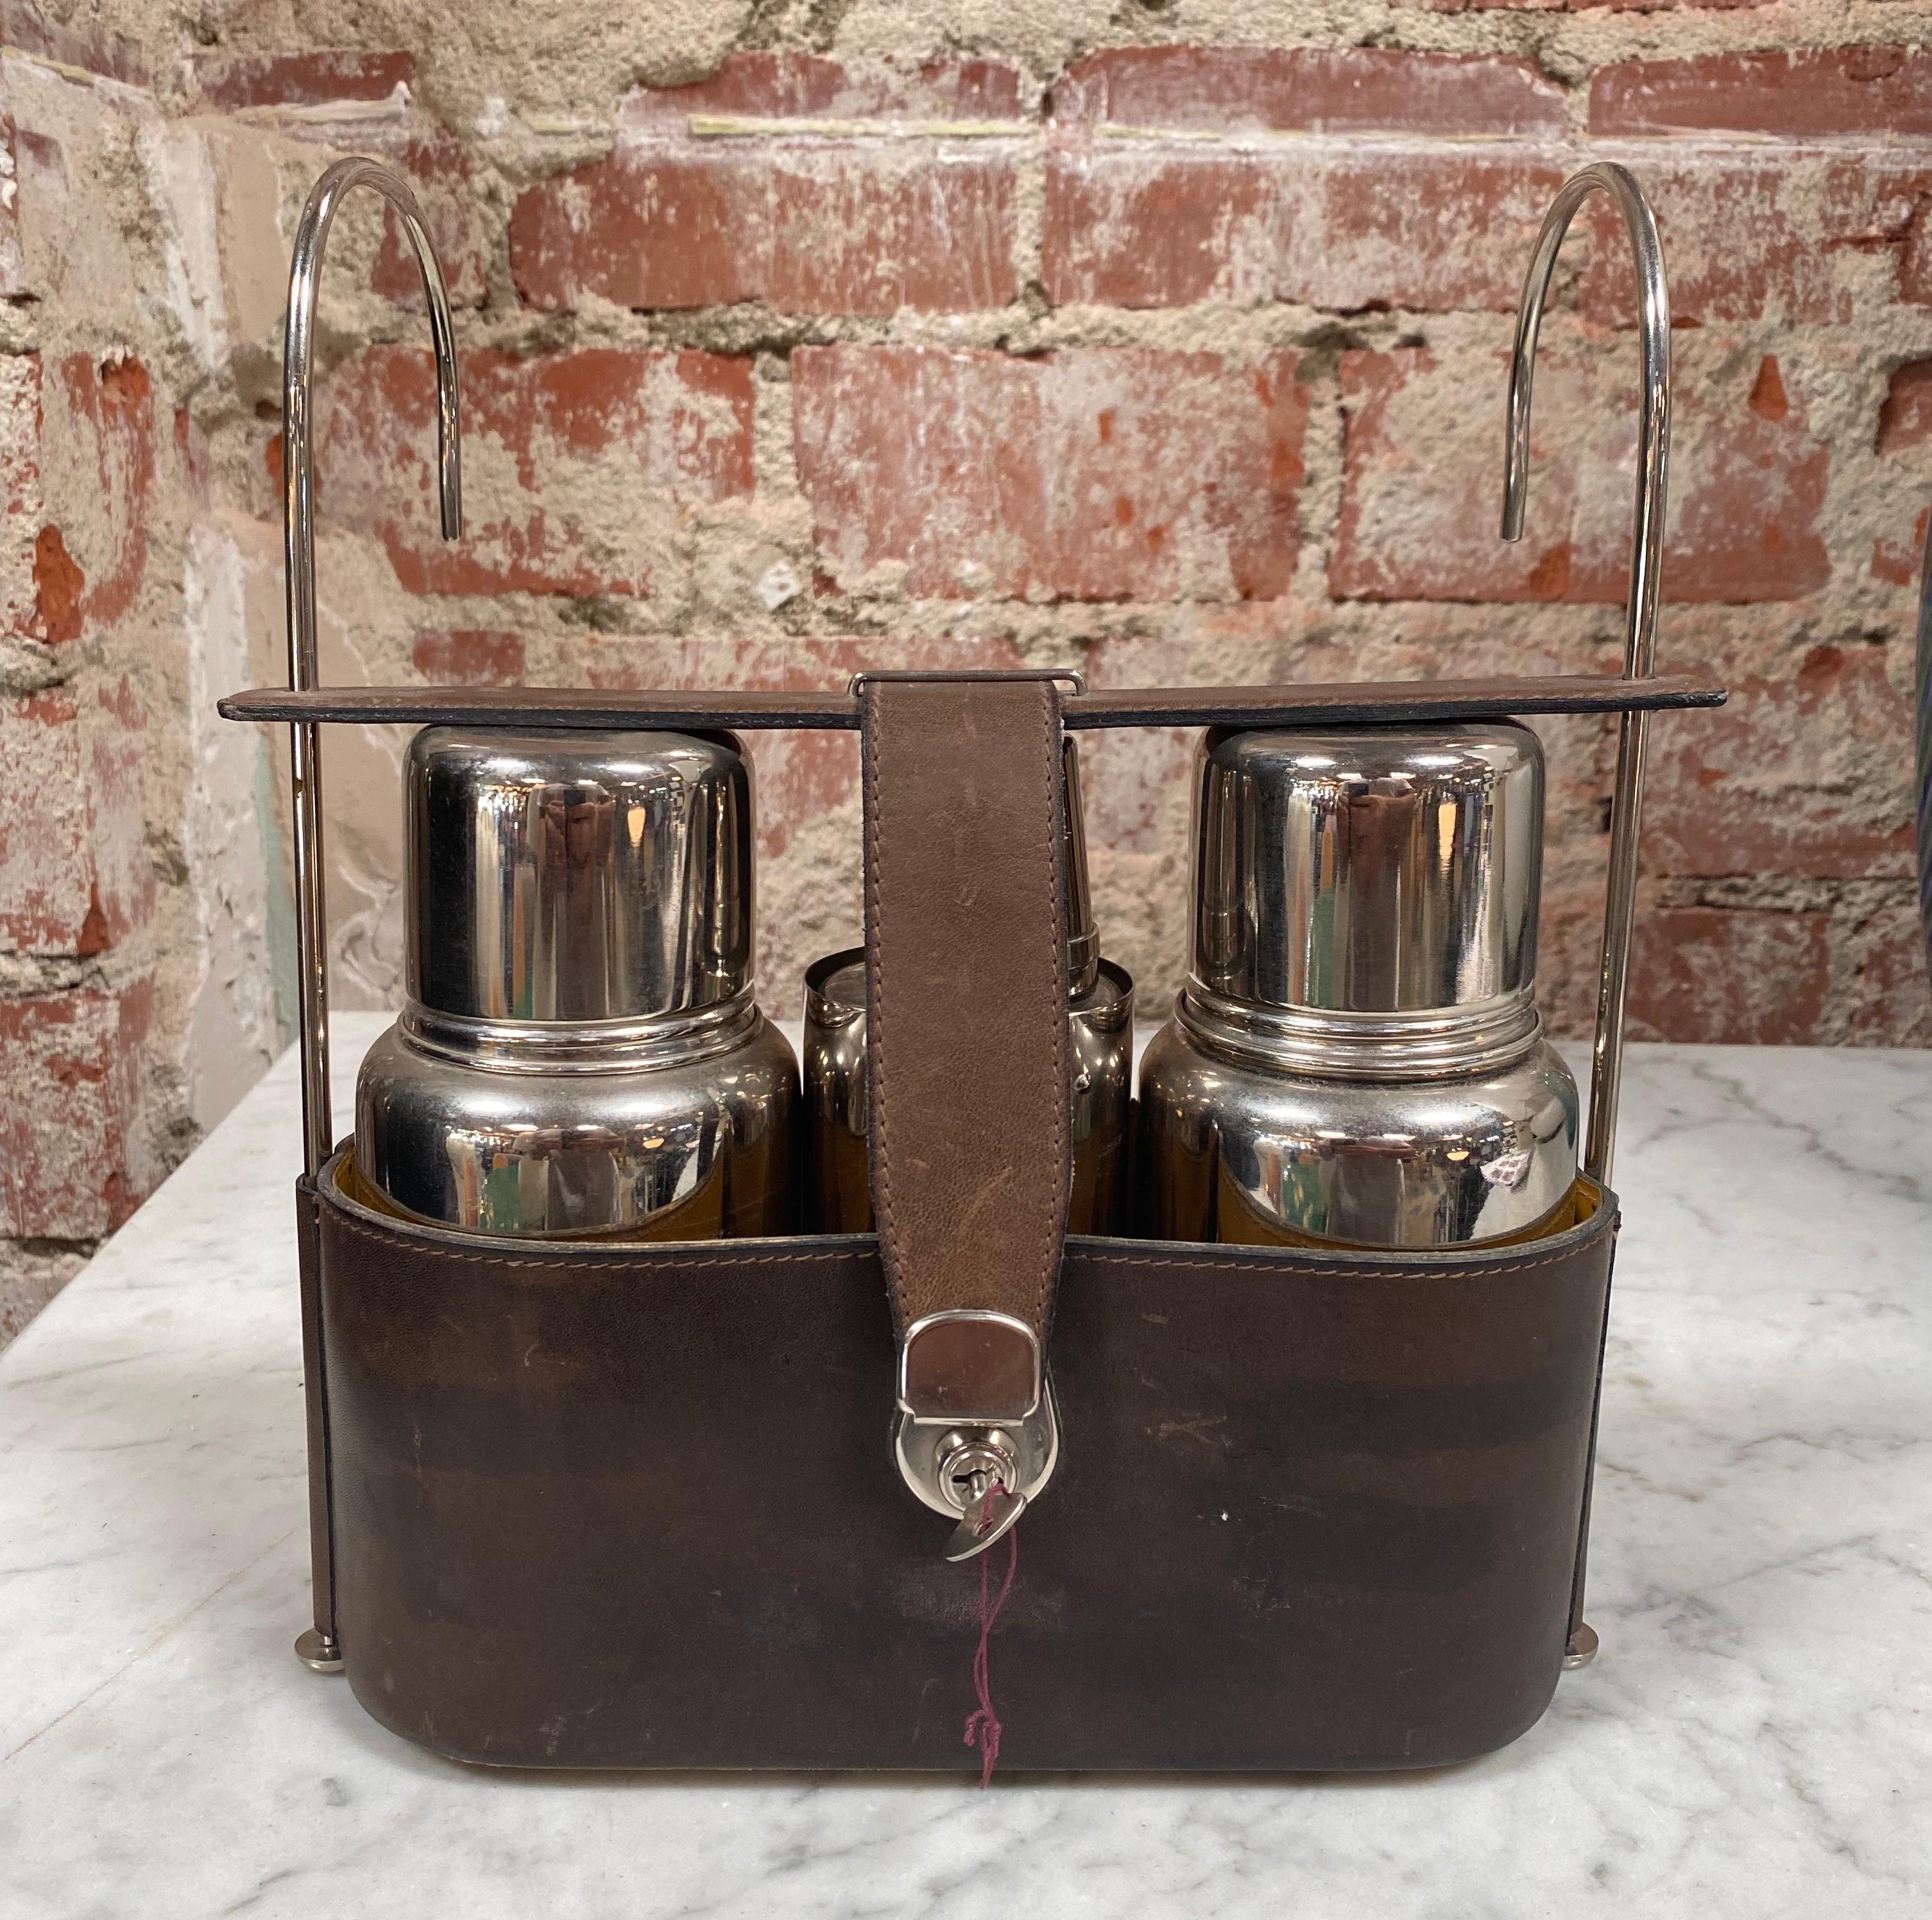 Chic Bartender set composed of 5 pieces in leather and original key made in italy 1970s in style of Gucci